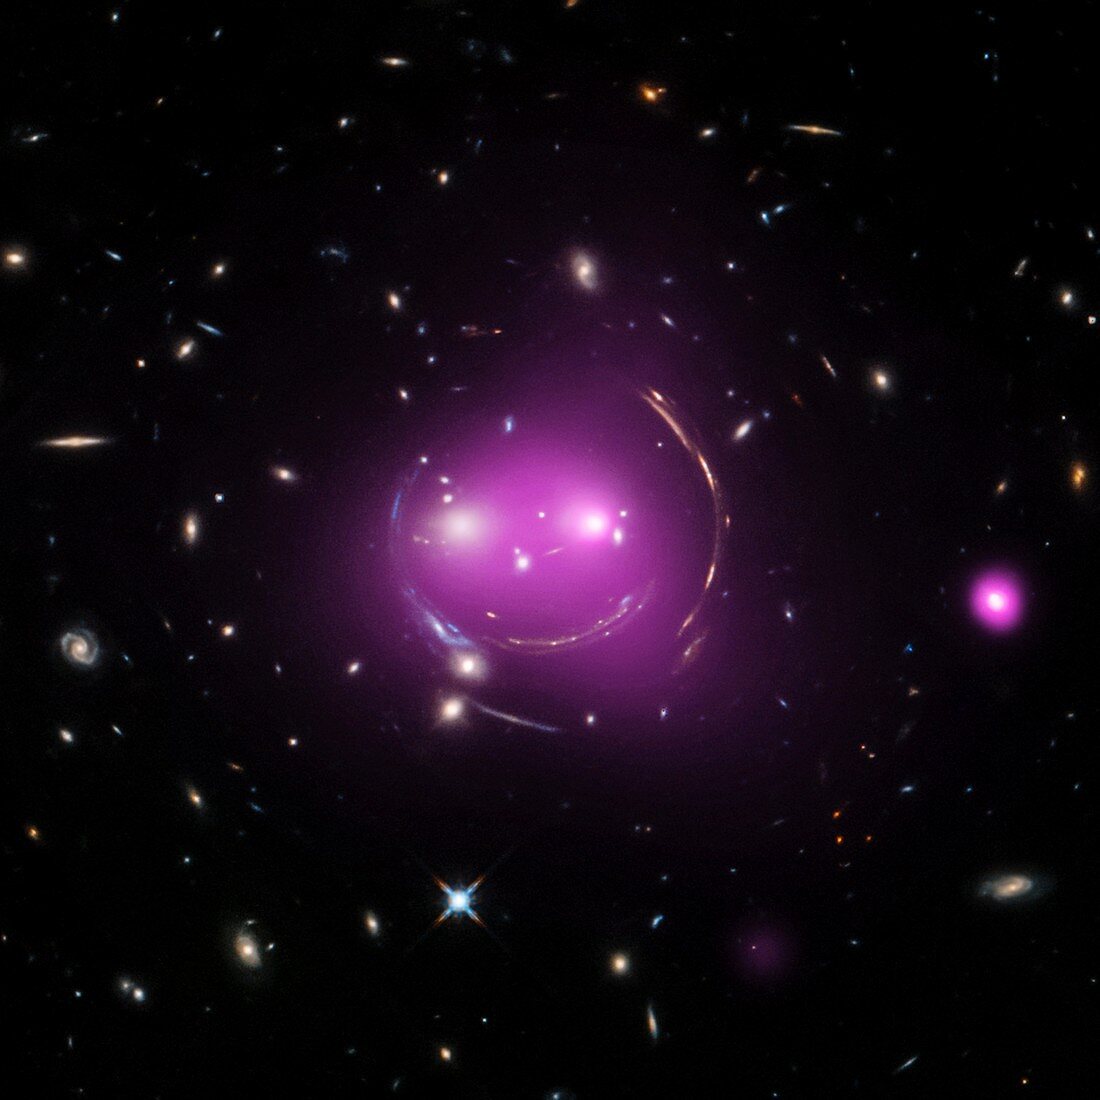 Cheshire Cat galaxy group